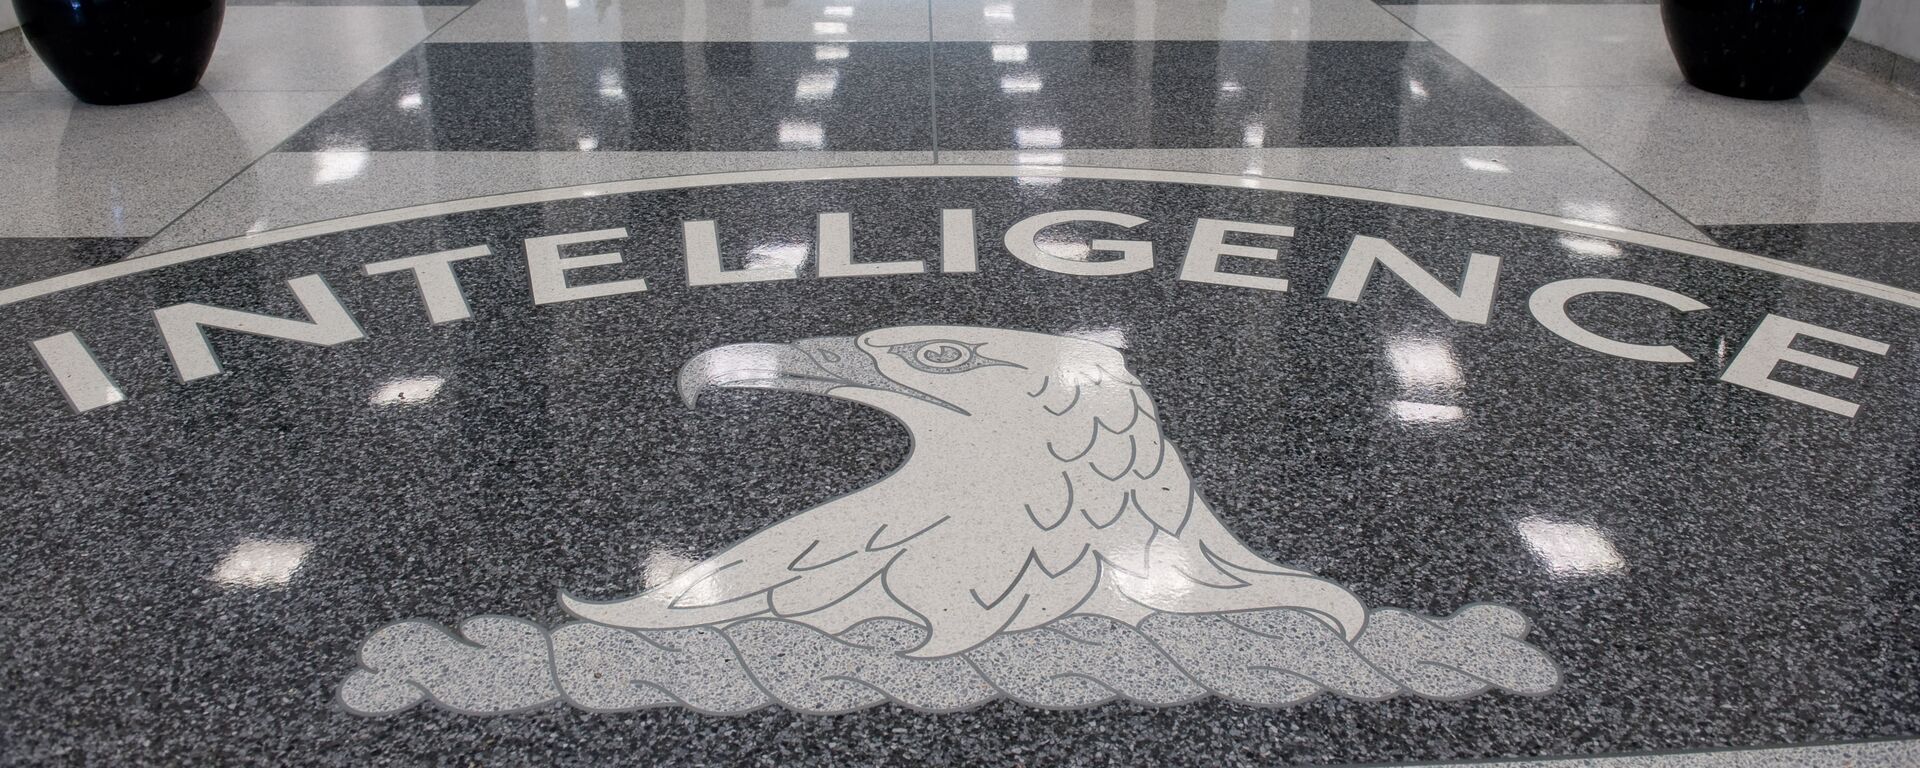 The Central Intelligence Agency (CIA) logo is displayed in the lobby of CIA Headquarters in Langley, Virginia, on August 14, 2008 - Sputnik International, 1920, 31.10.2018